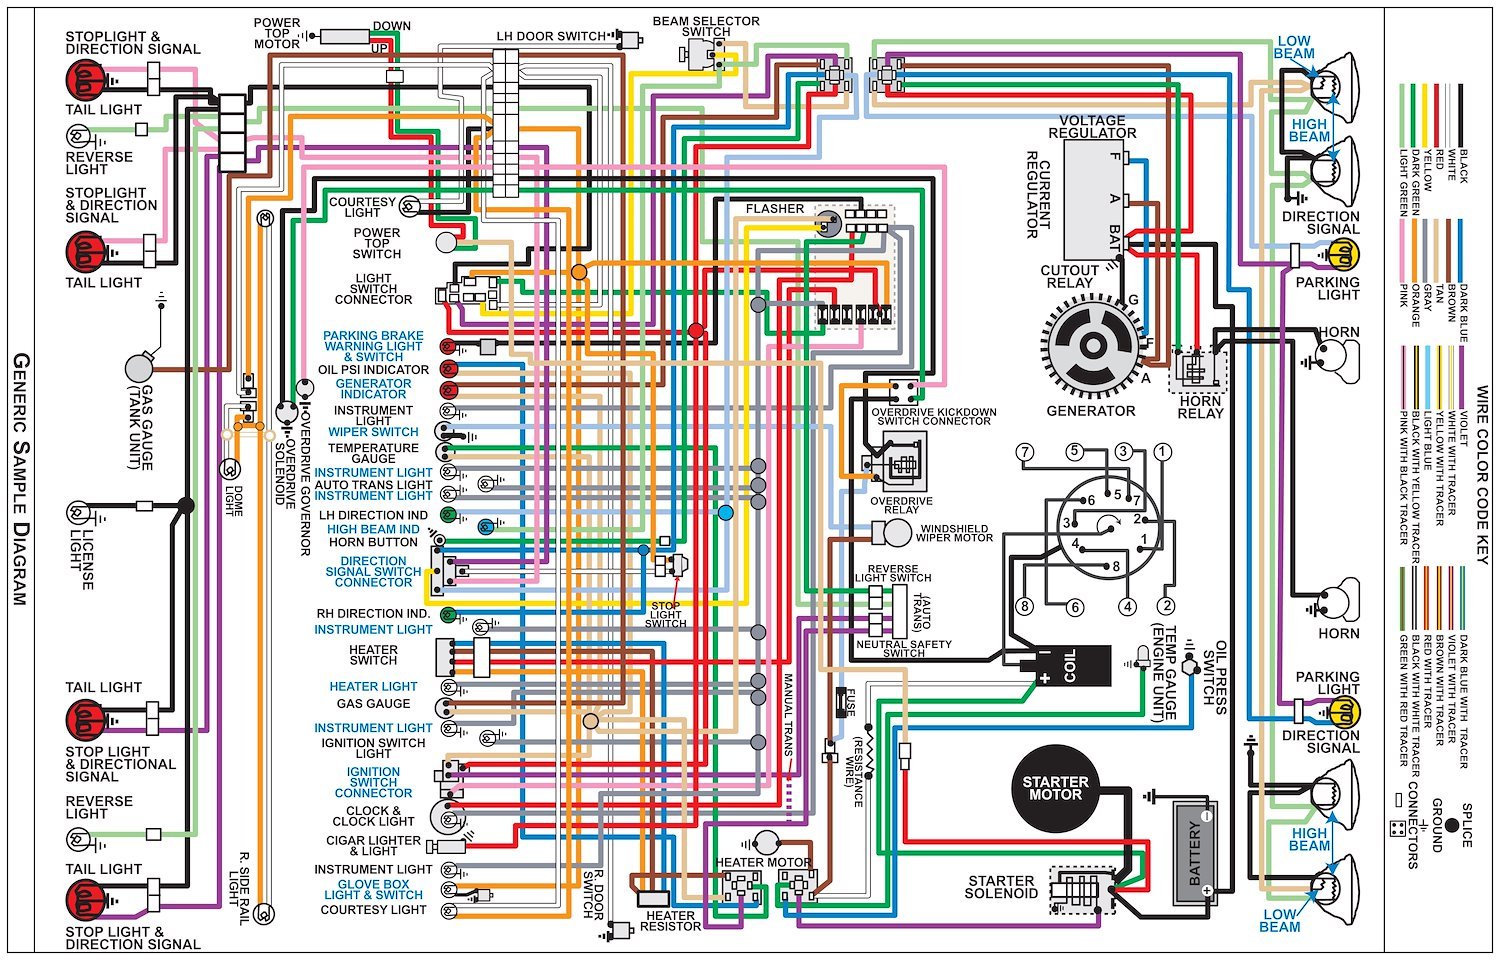 Wiring Diagram for 1963 Ford E-Series (Econoline), 11